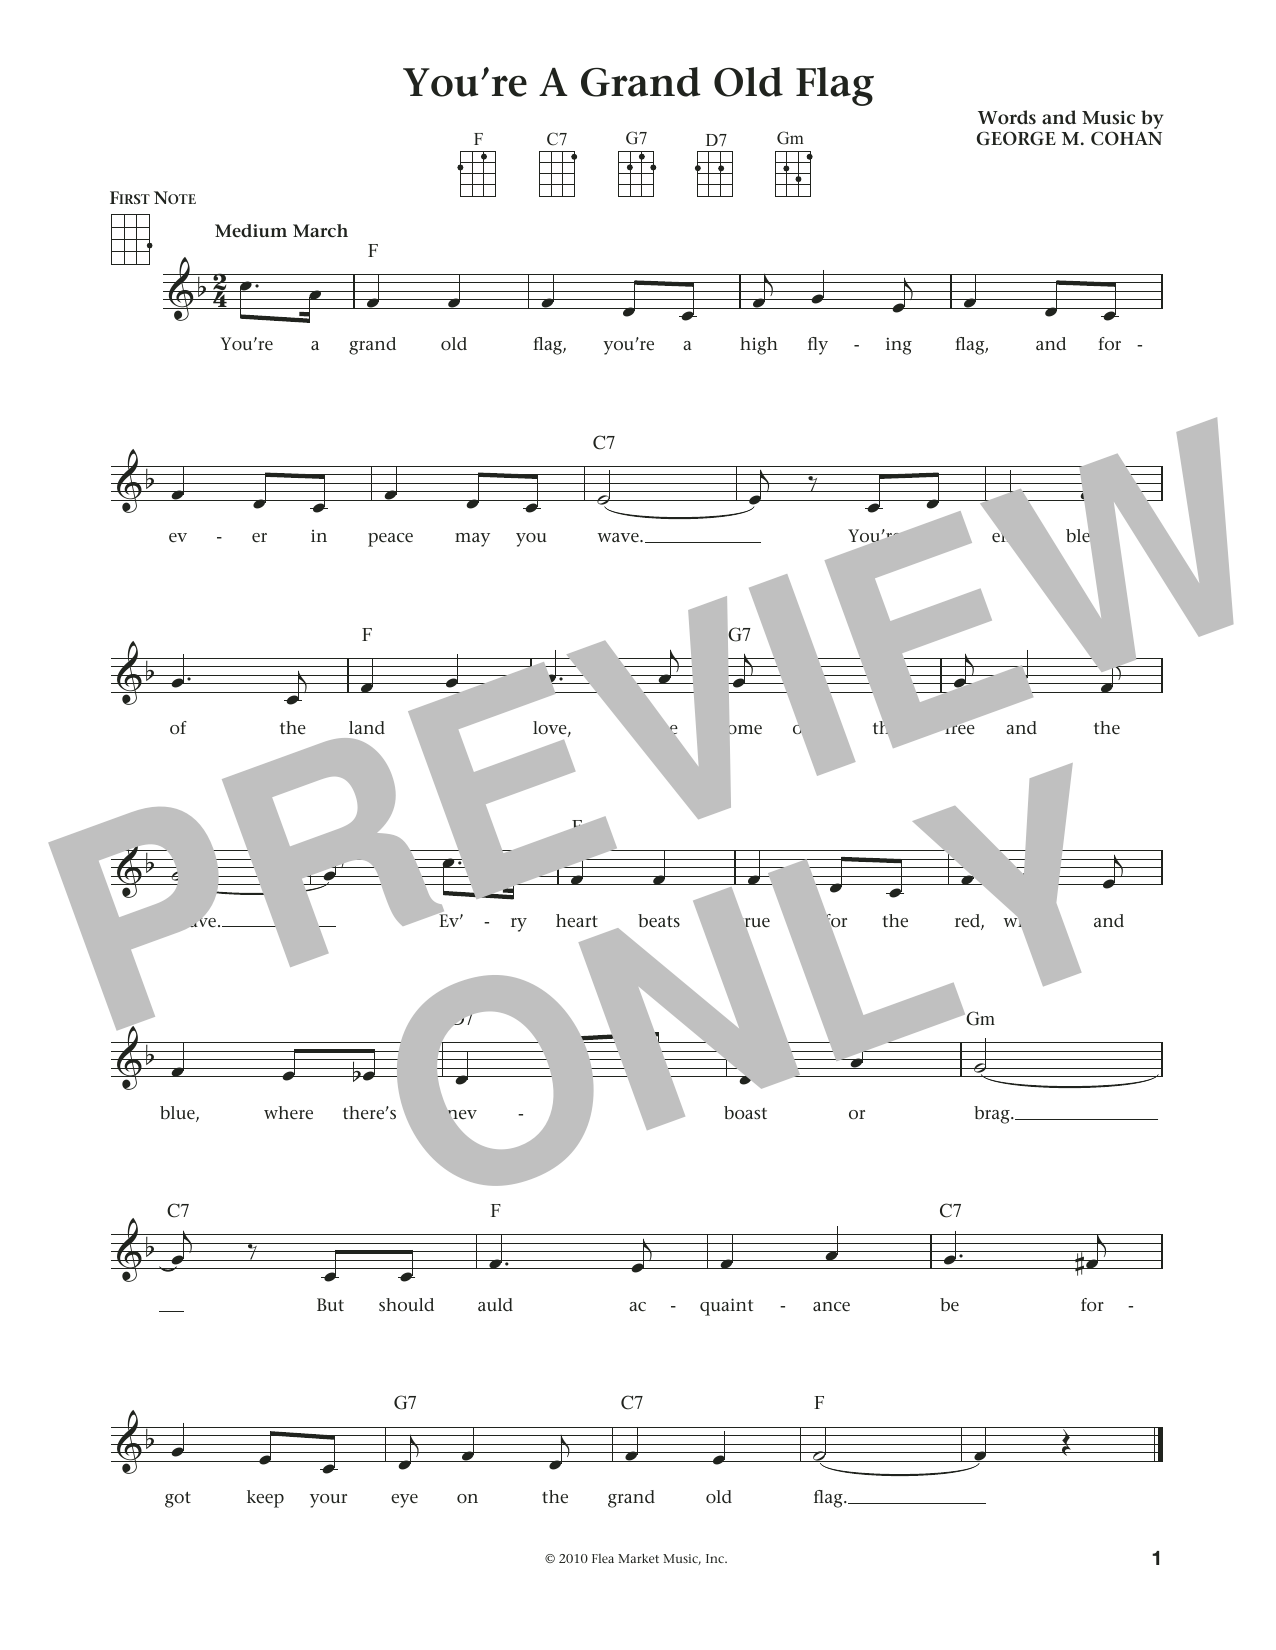 Download George Cohan You're A Grand Old Flag (from The Daily Sheet Music